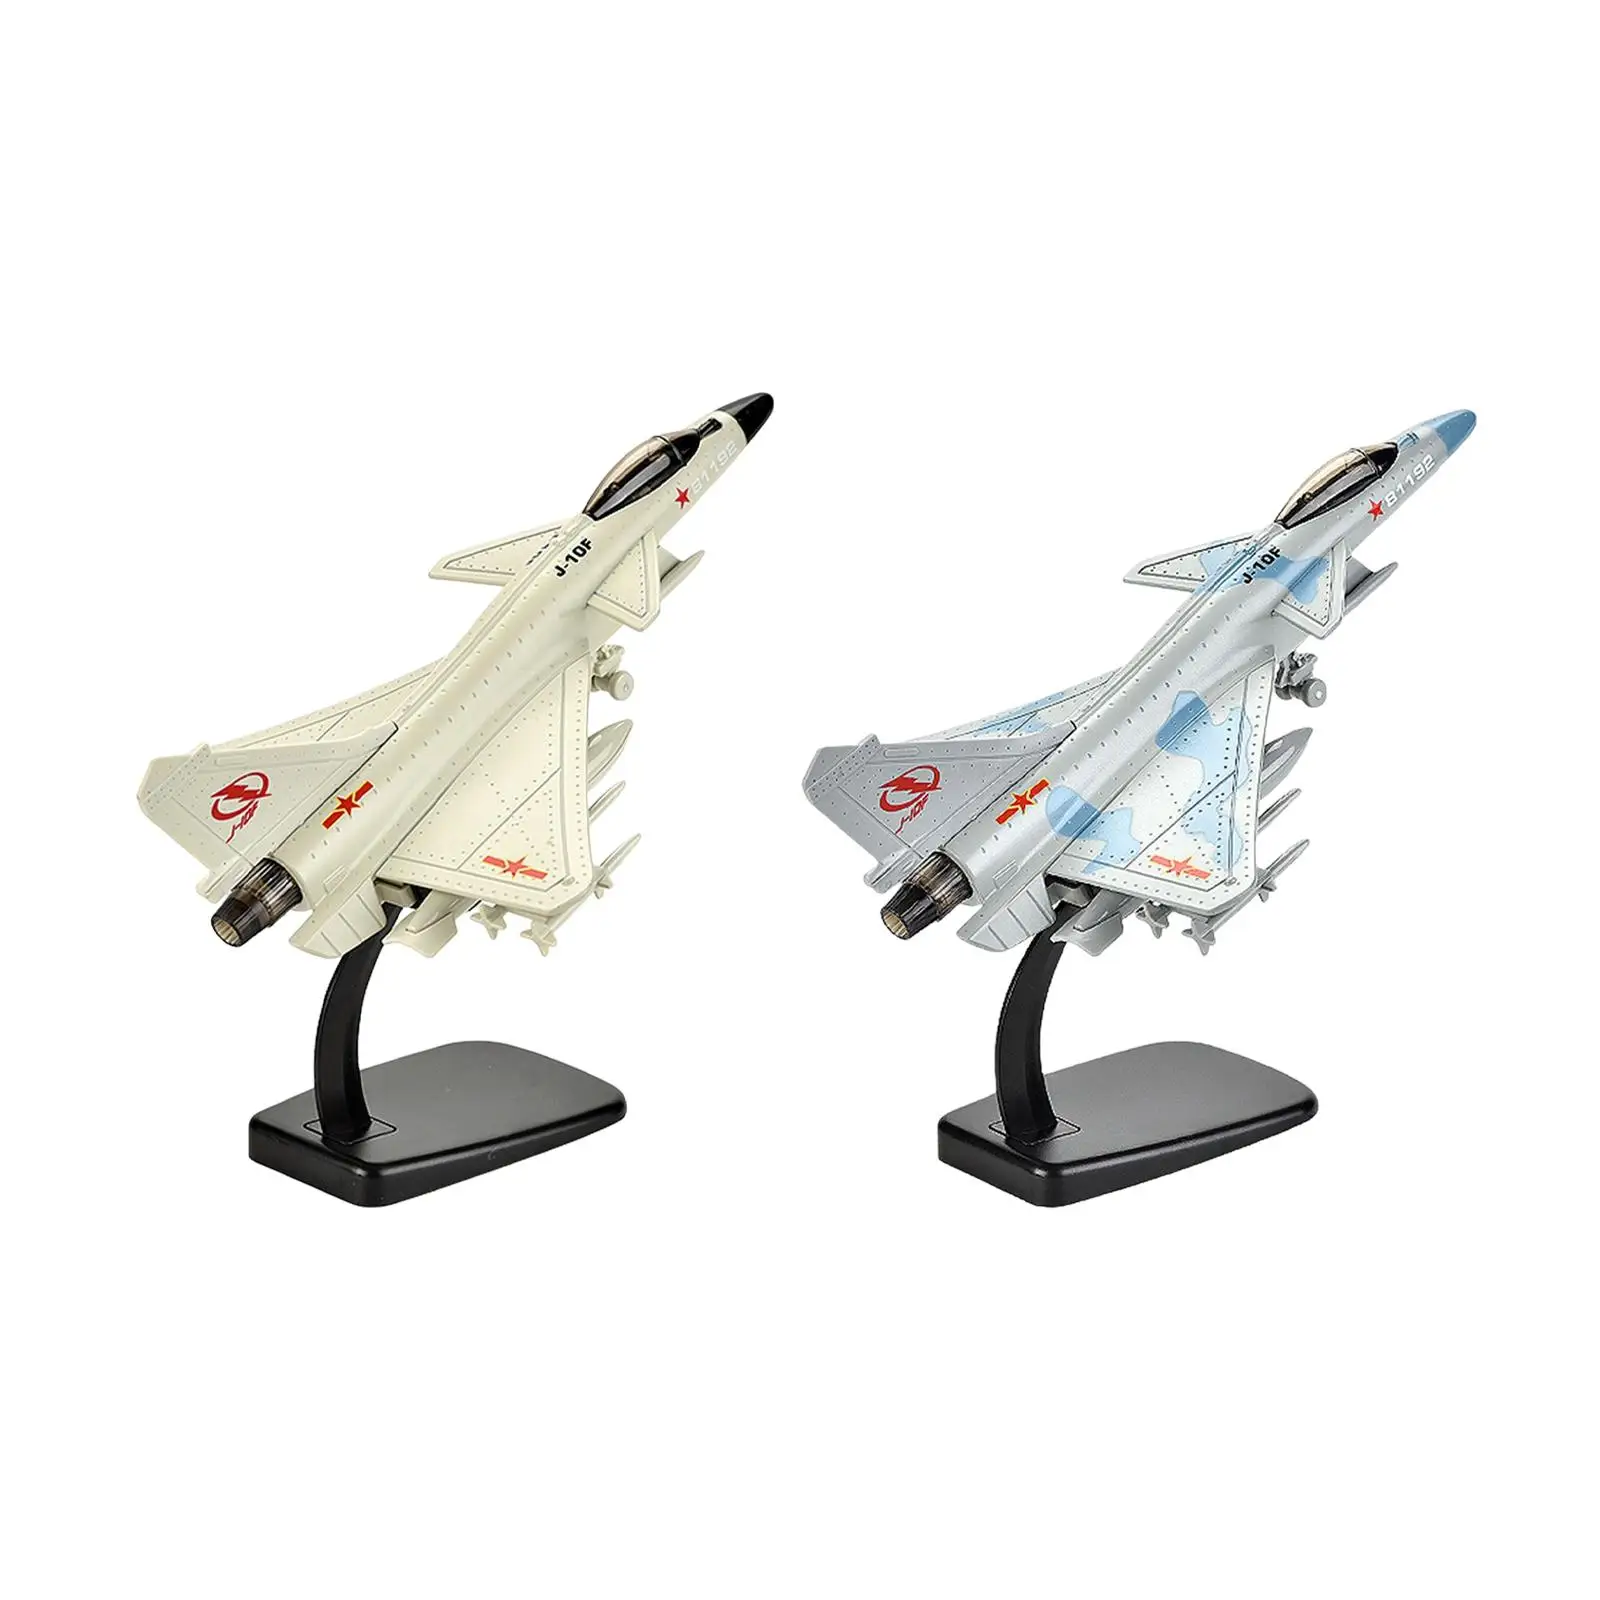 1/72 Fighter Aircraft Model Pull Back Fighter with Stand for Collectibles